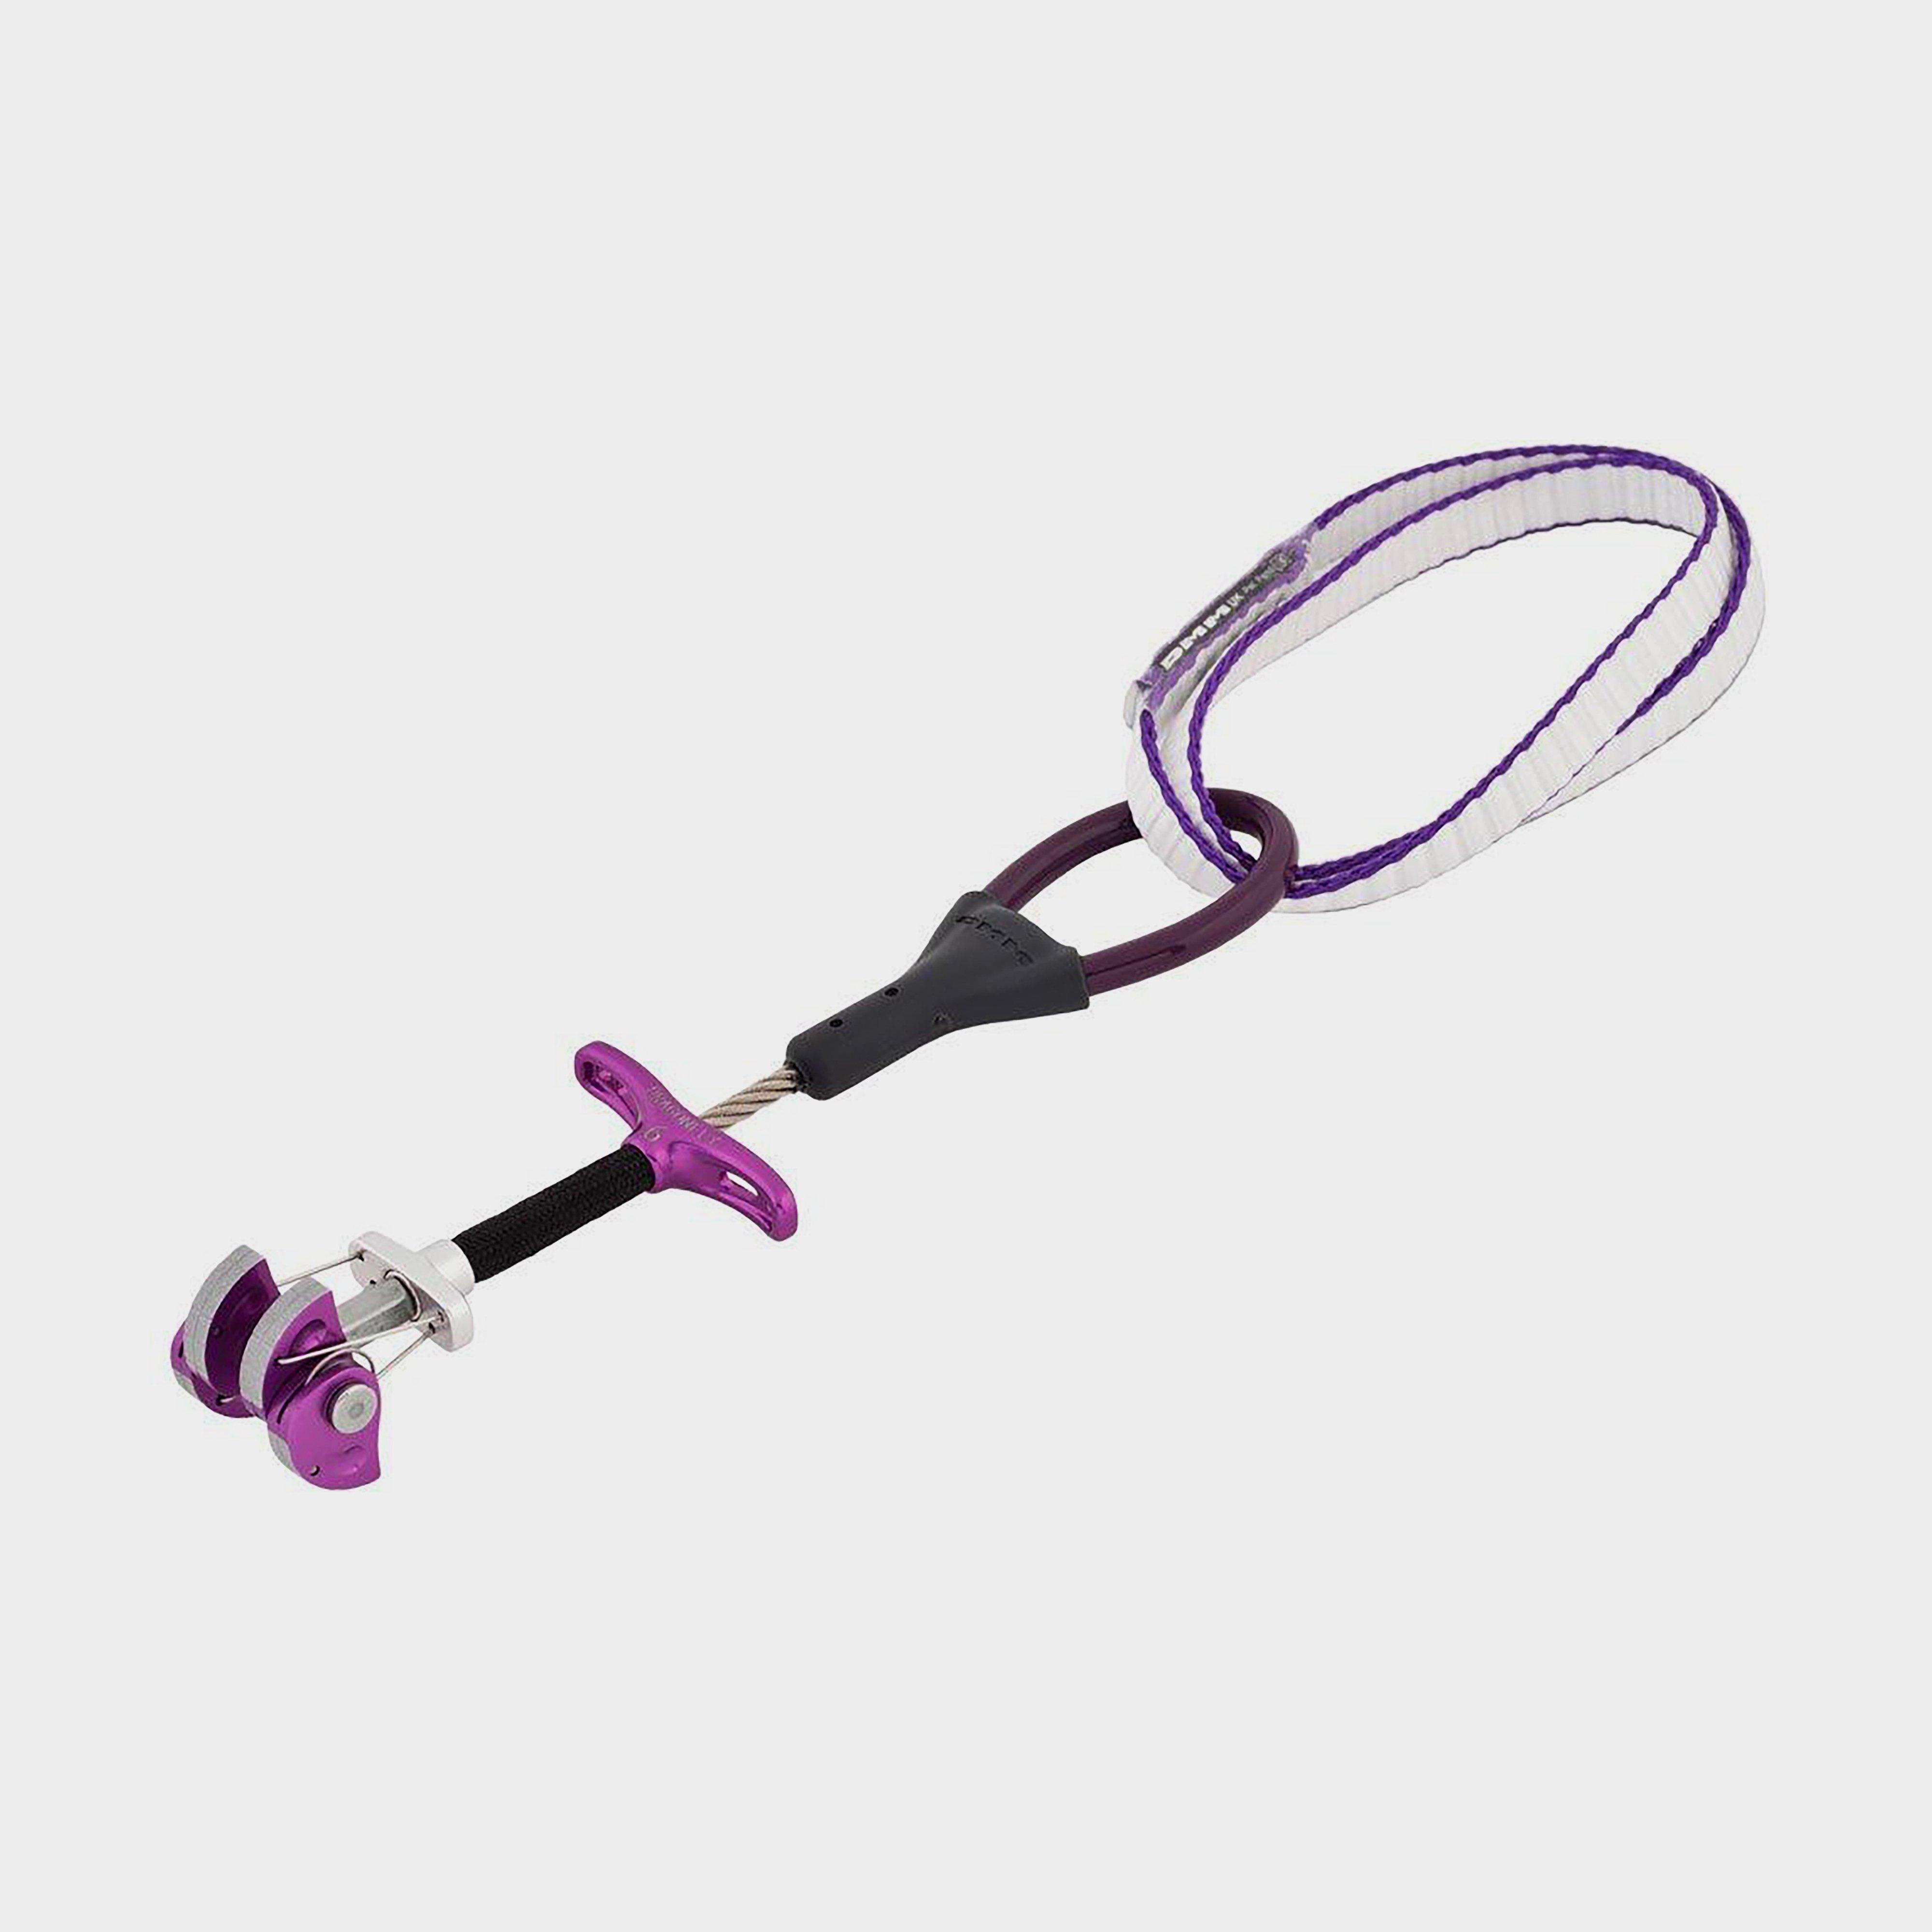  DMM Dragonfly Cam (Size 6), Purple